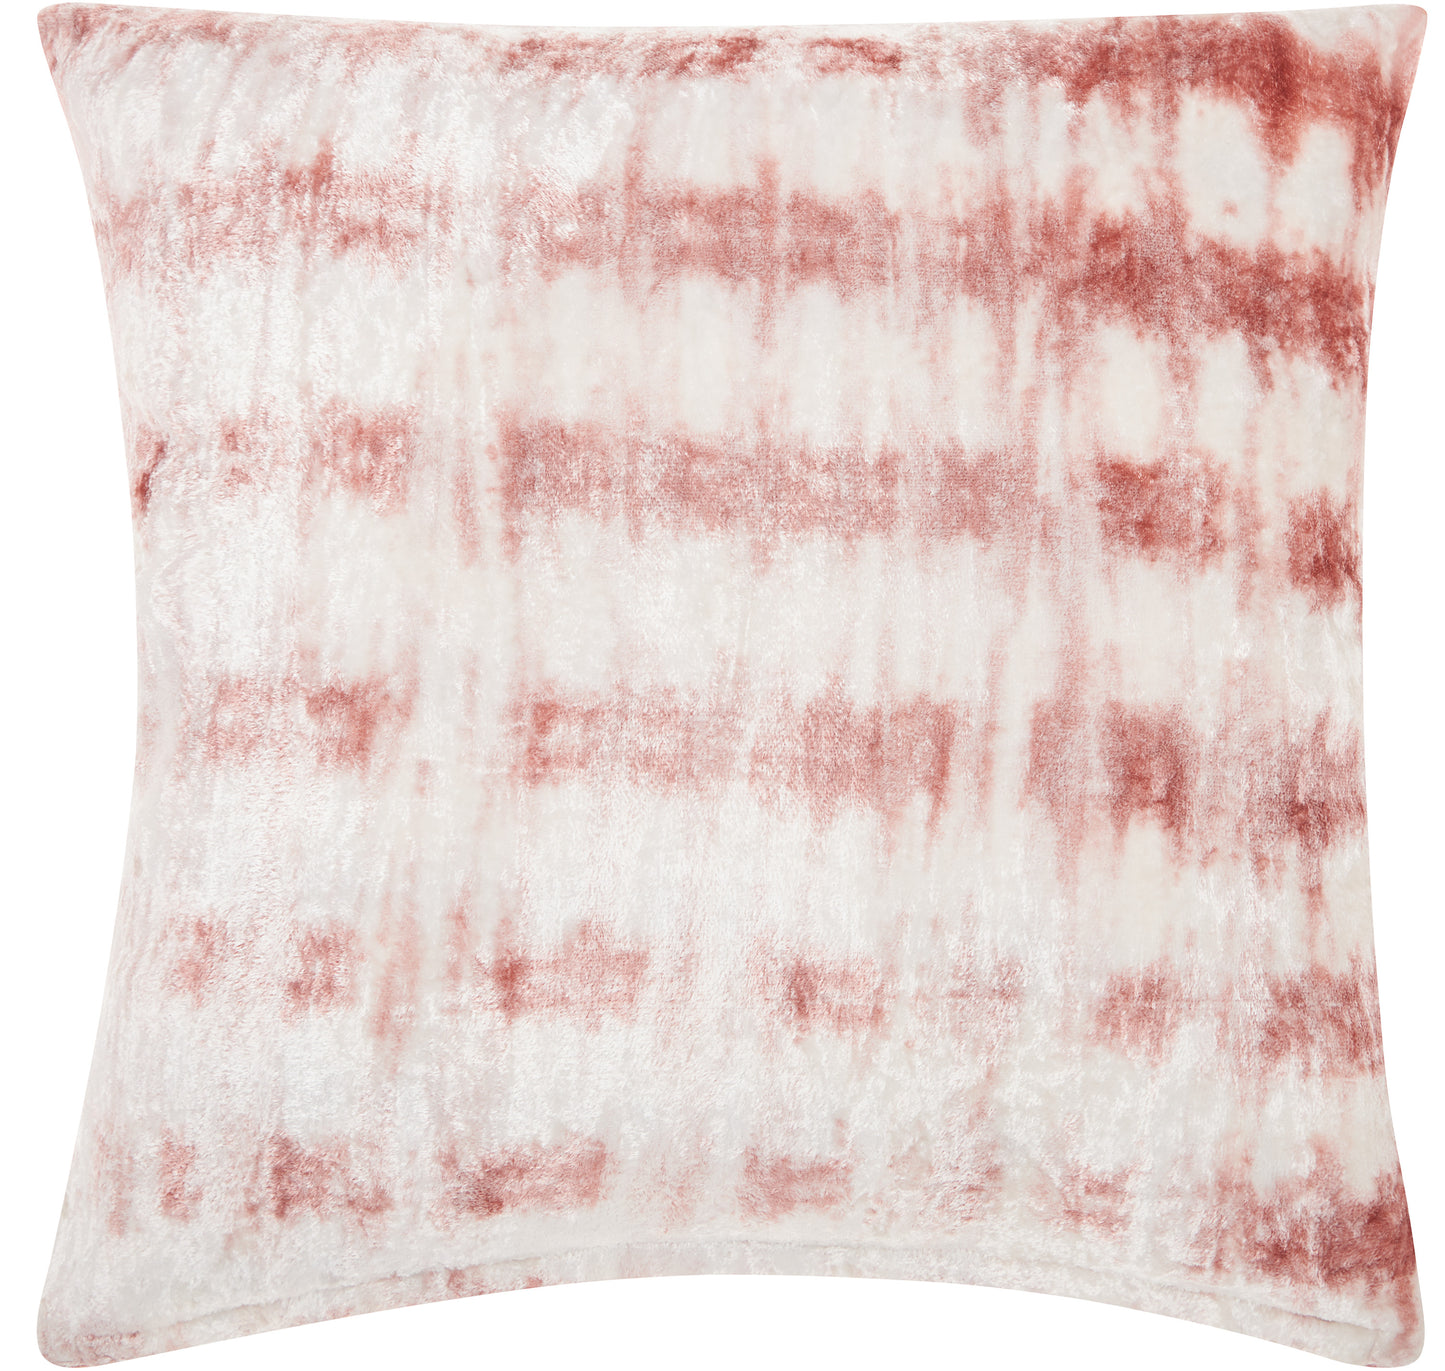 Life Styles CS001 Synthetic Blend Velvet Tie Dye Throw Pillow From Mina Victory By Nourison Rugs